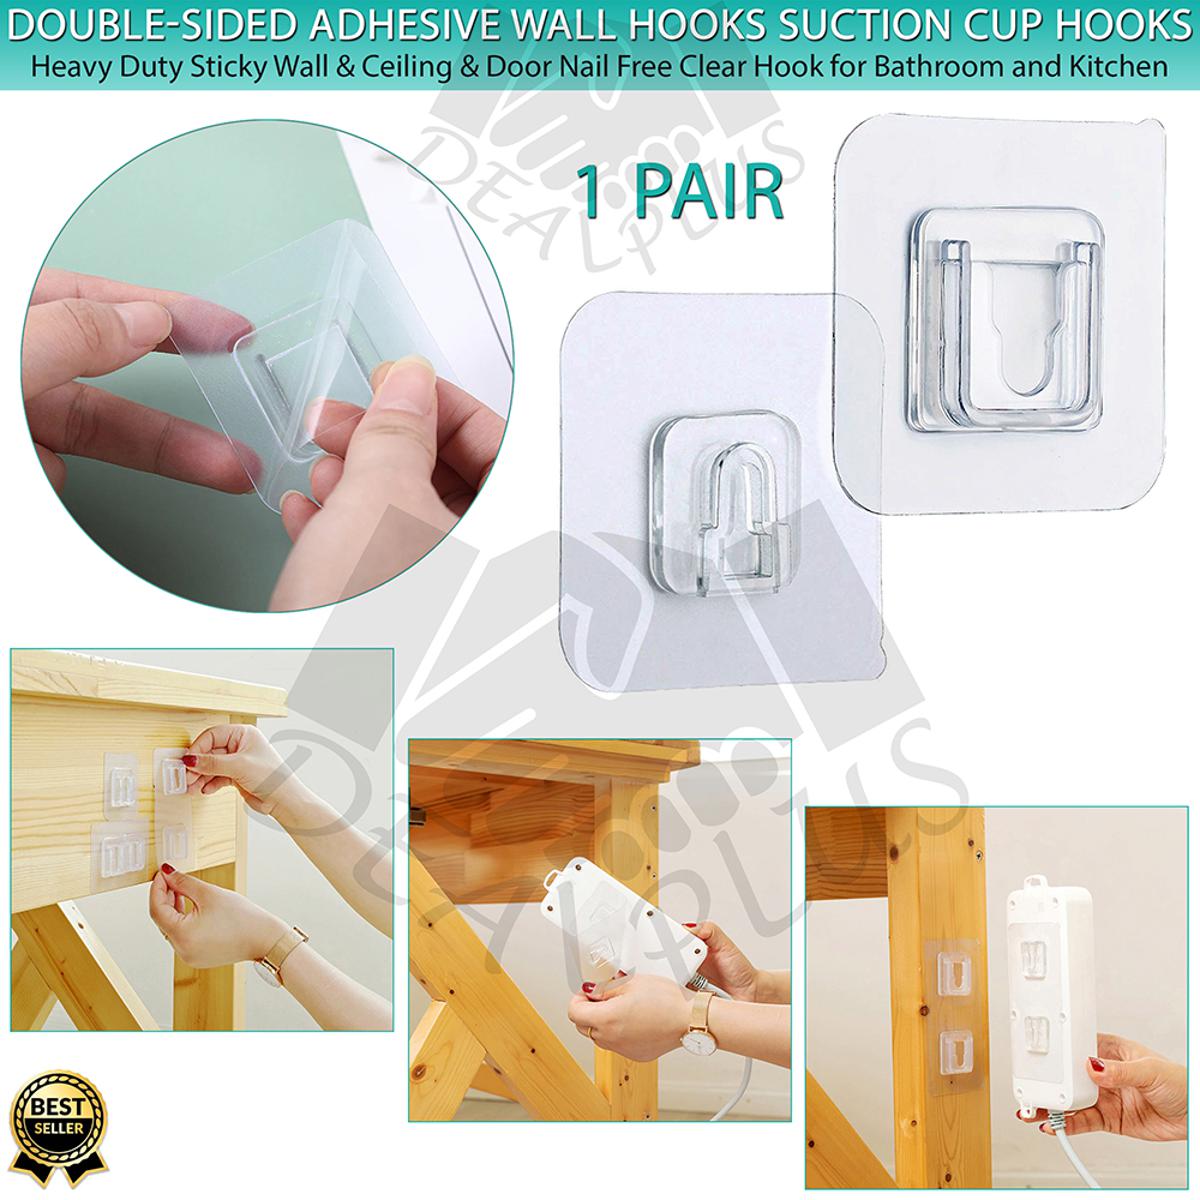 1 Pair Double-sided Adhesive Wall Hooks Suction Cup Hooks stick